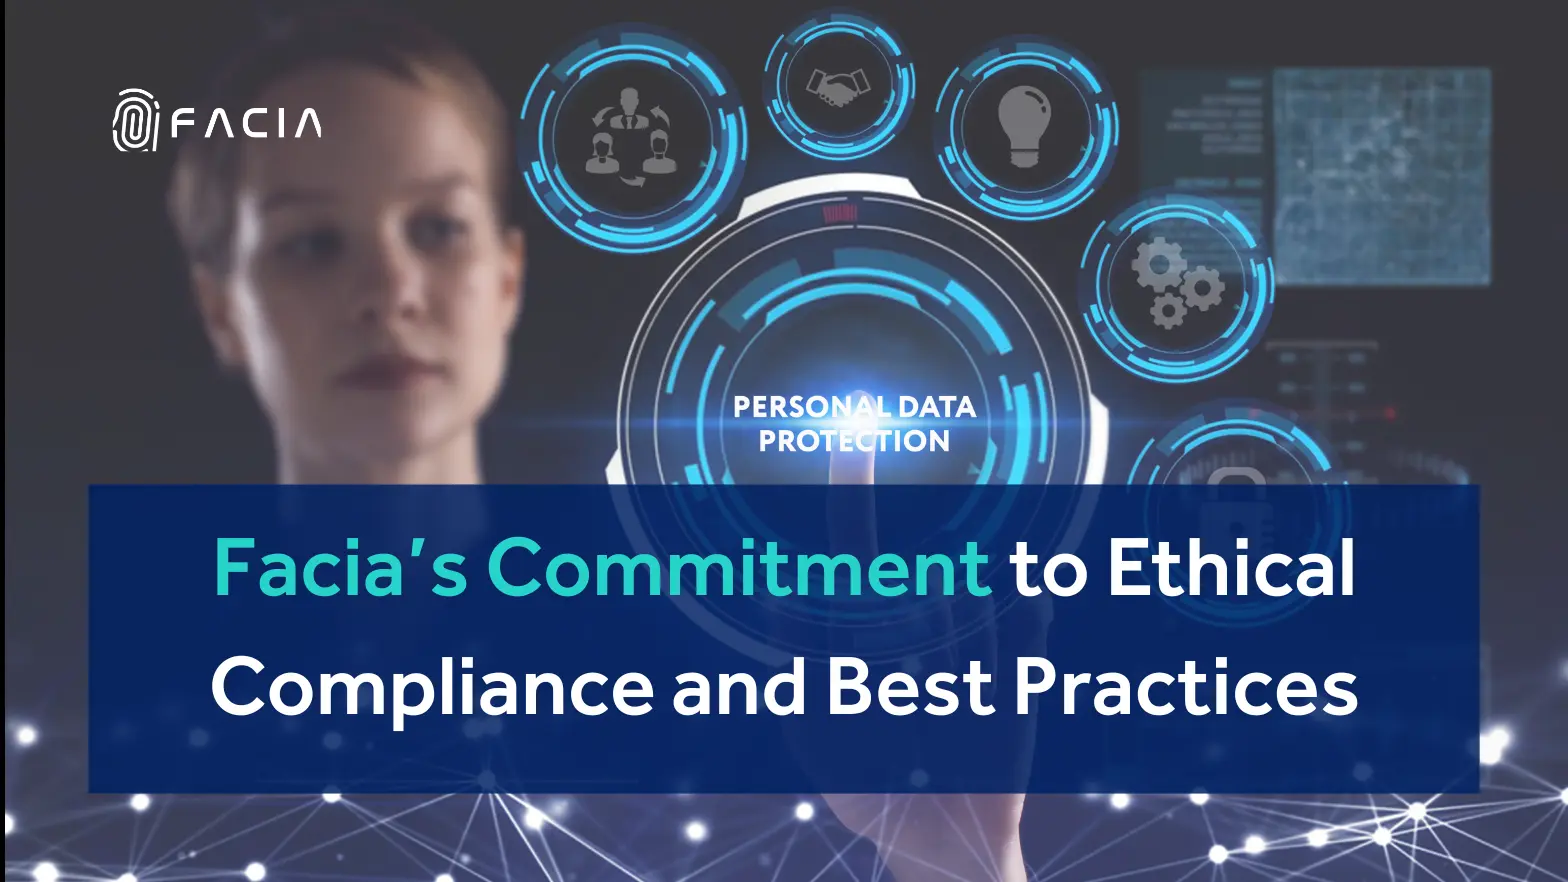 Symbolizing Facia's commitment to ethical compliance and adherence to best practices in the industry.